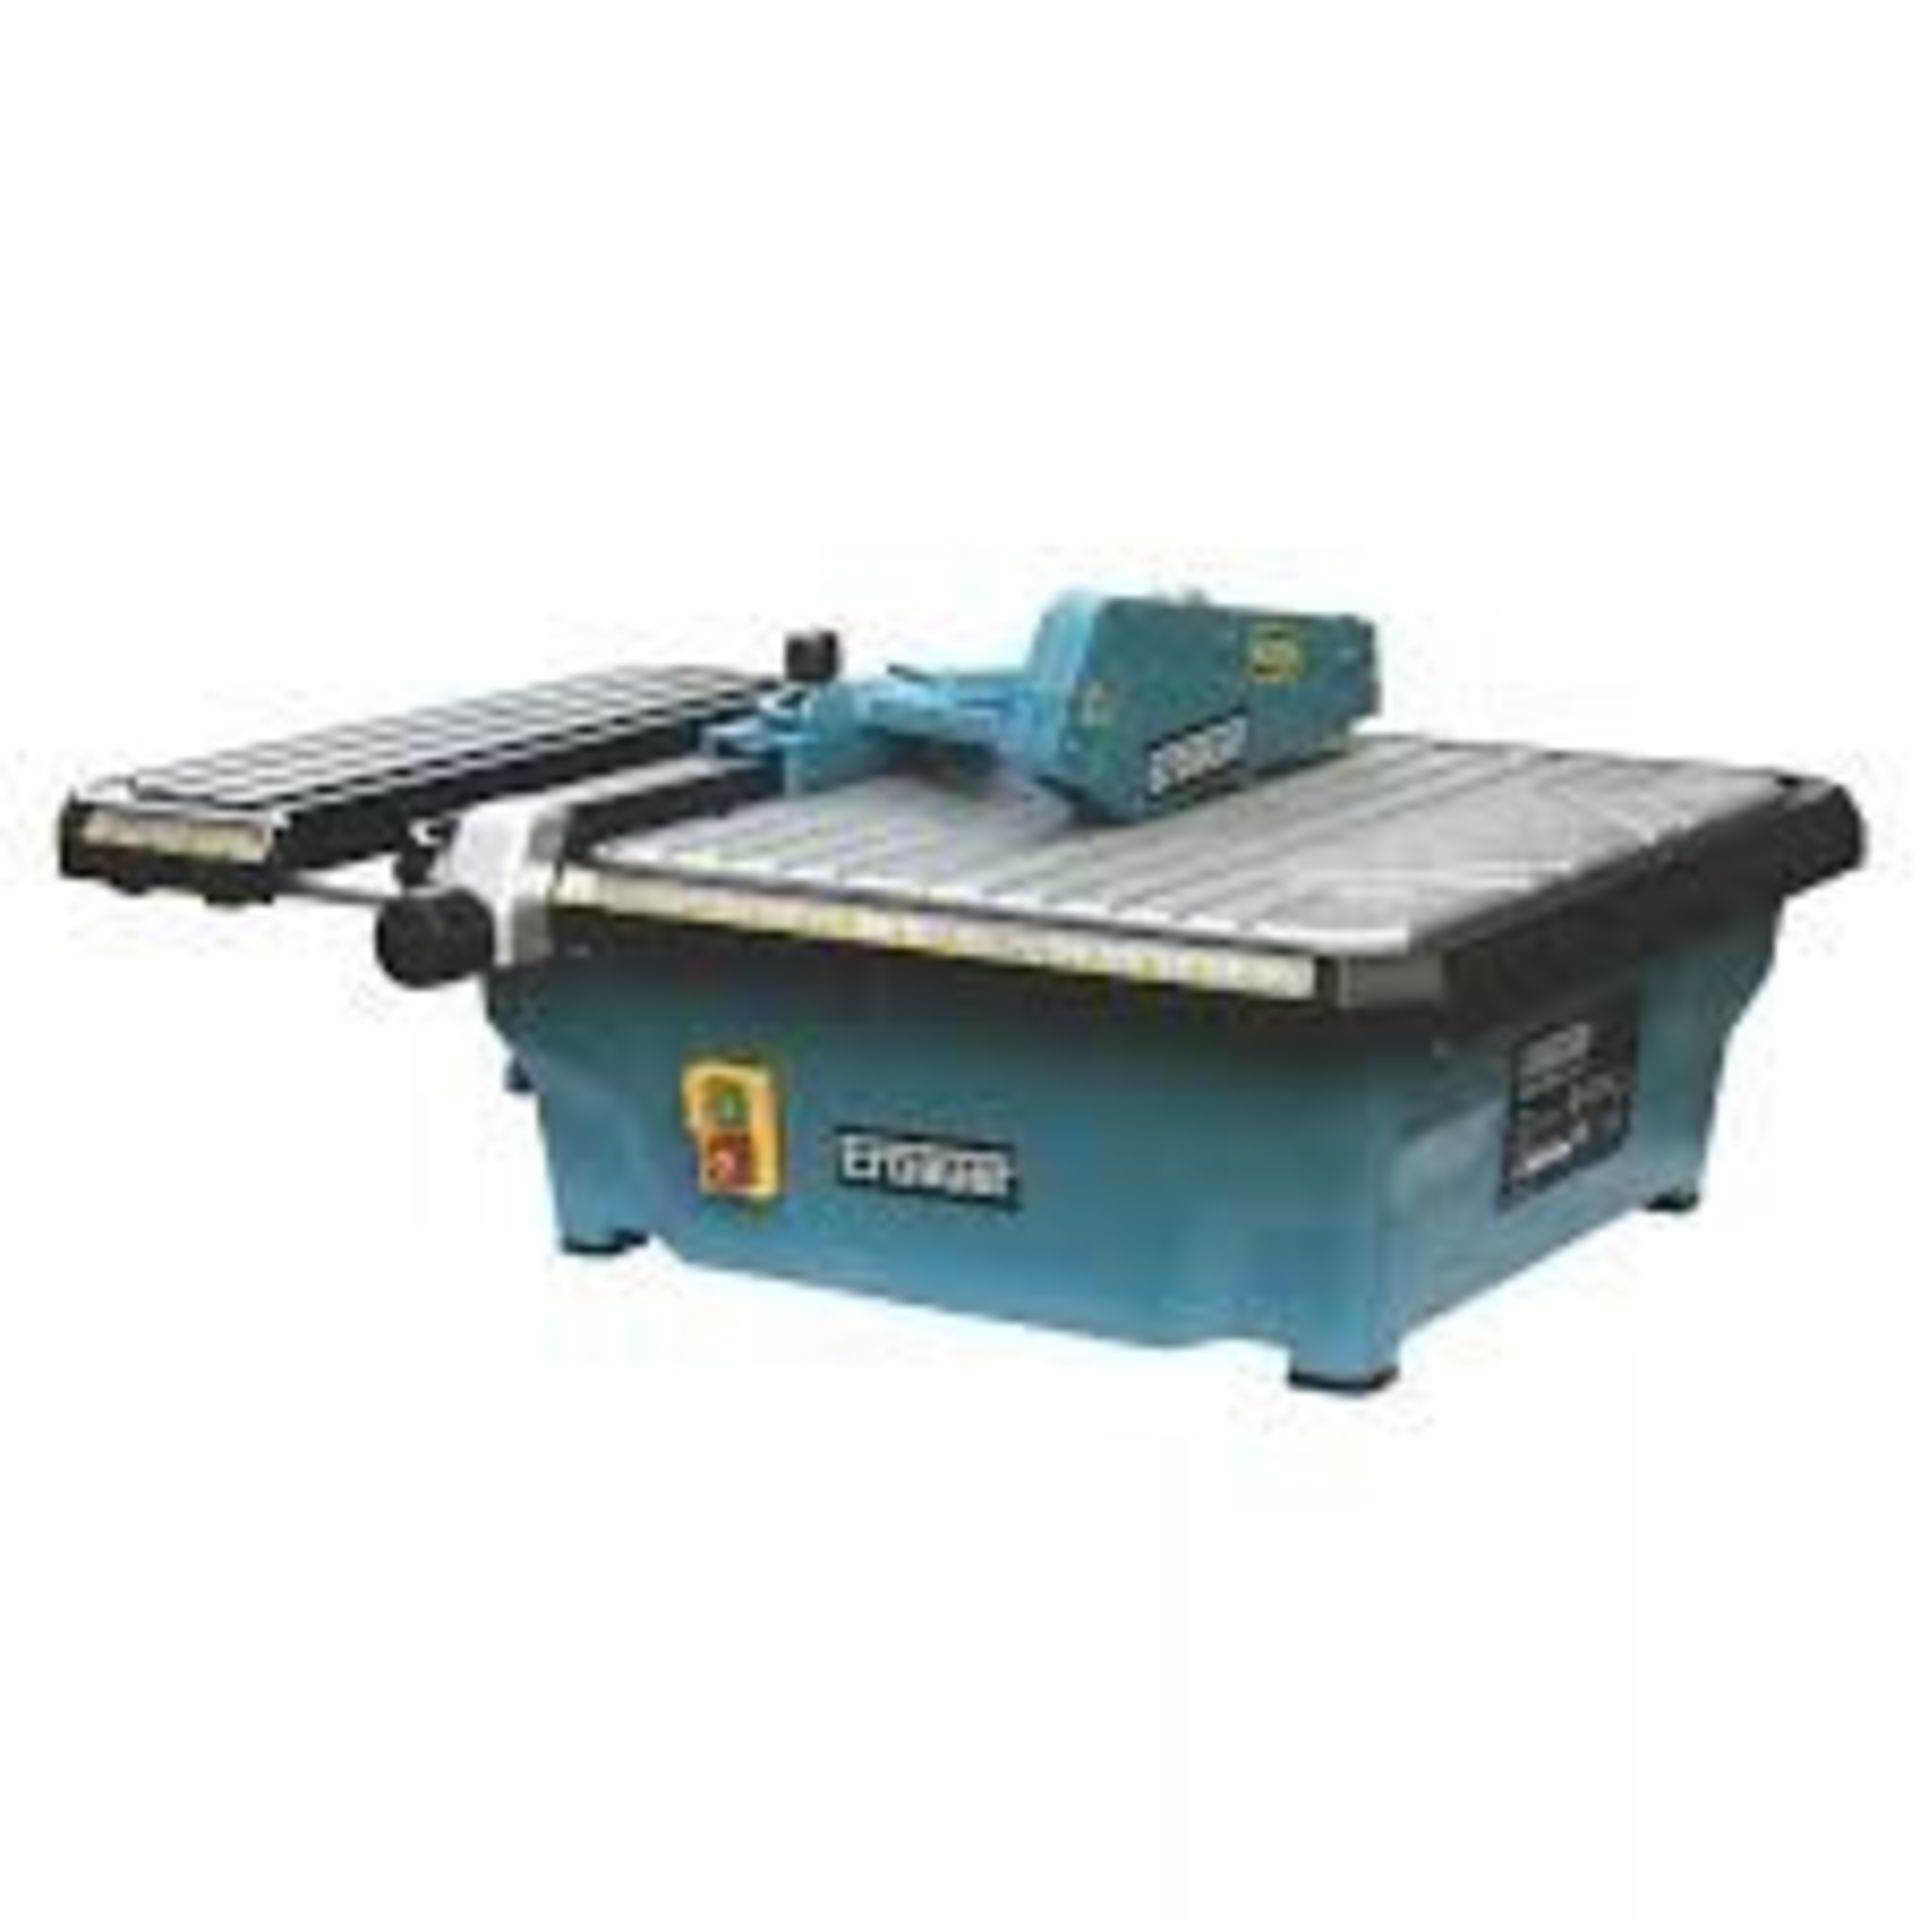 Erbauer 750W Electric Tile Cutter 240V. -ER42. Suitable for cutting all types of tile such as